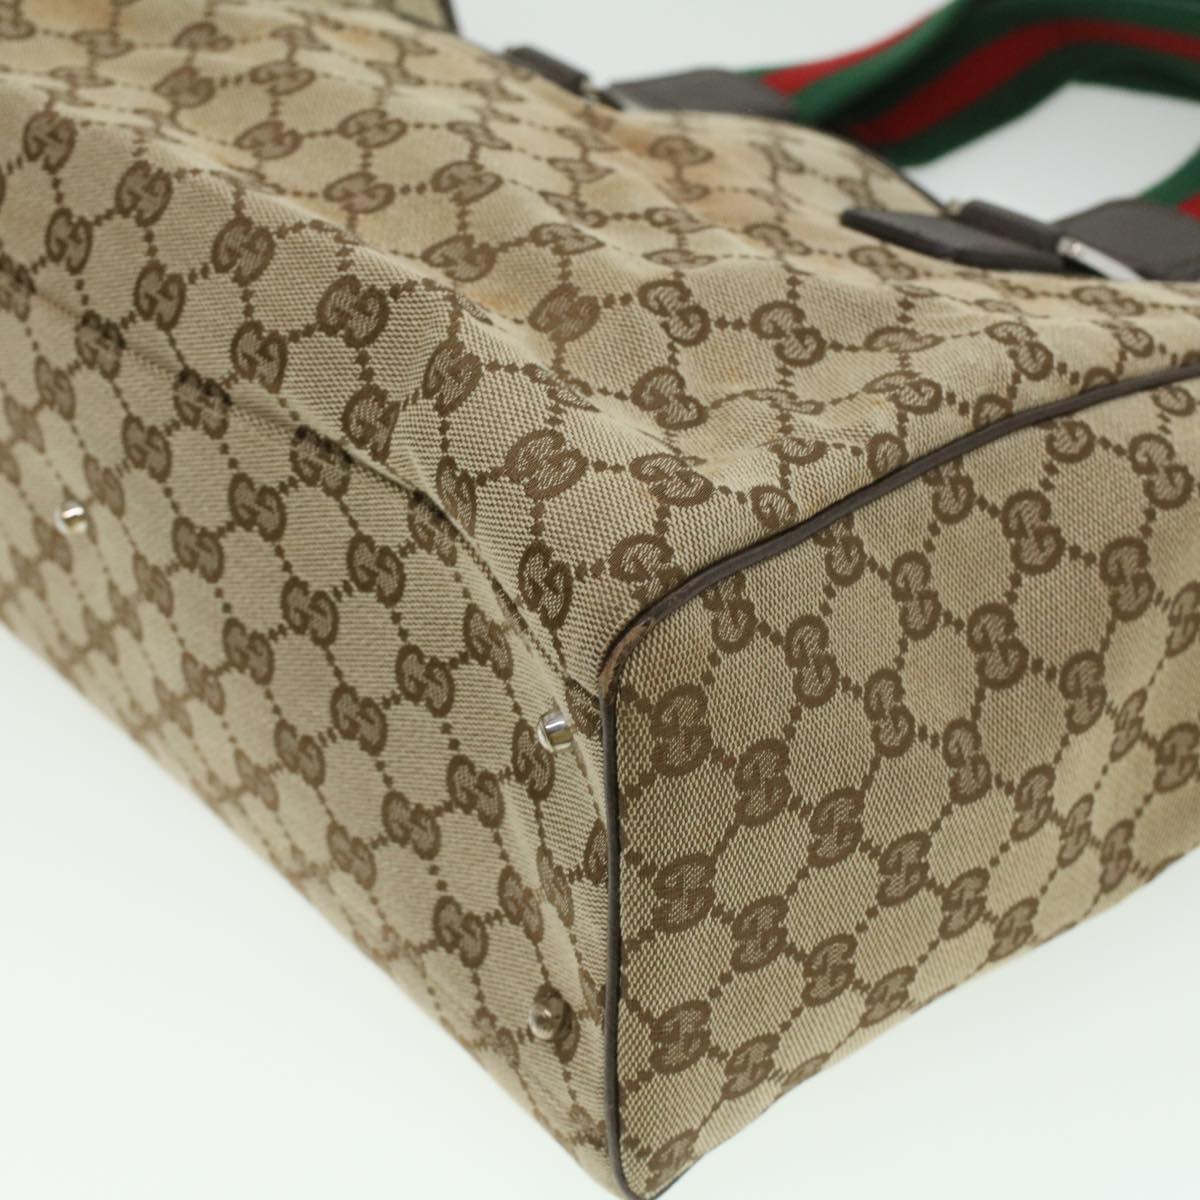 GUCCI GG Canvas Web Sherry Line Tote Bag Beige Red Green Auth ro581